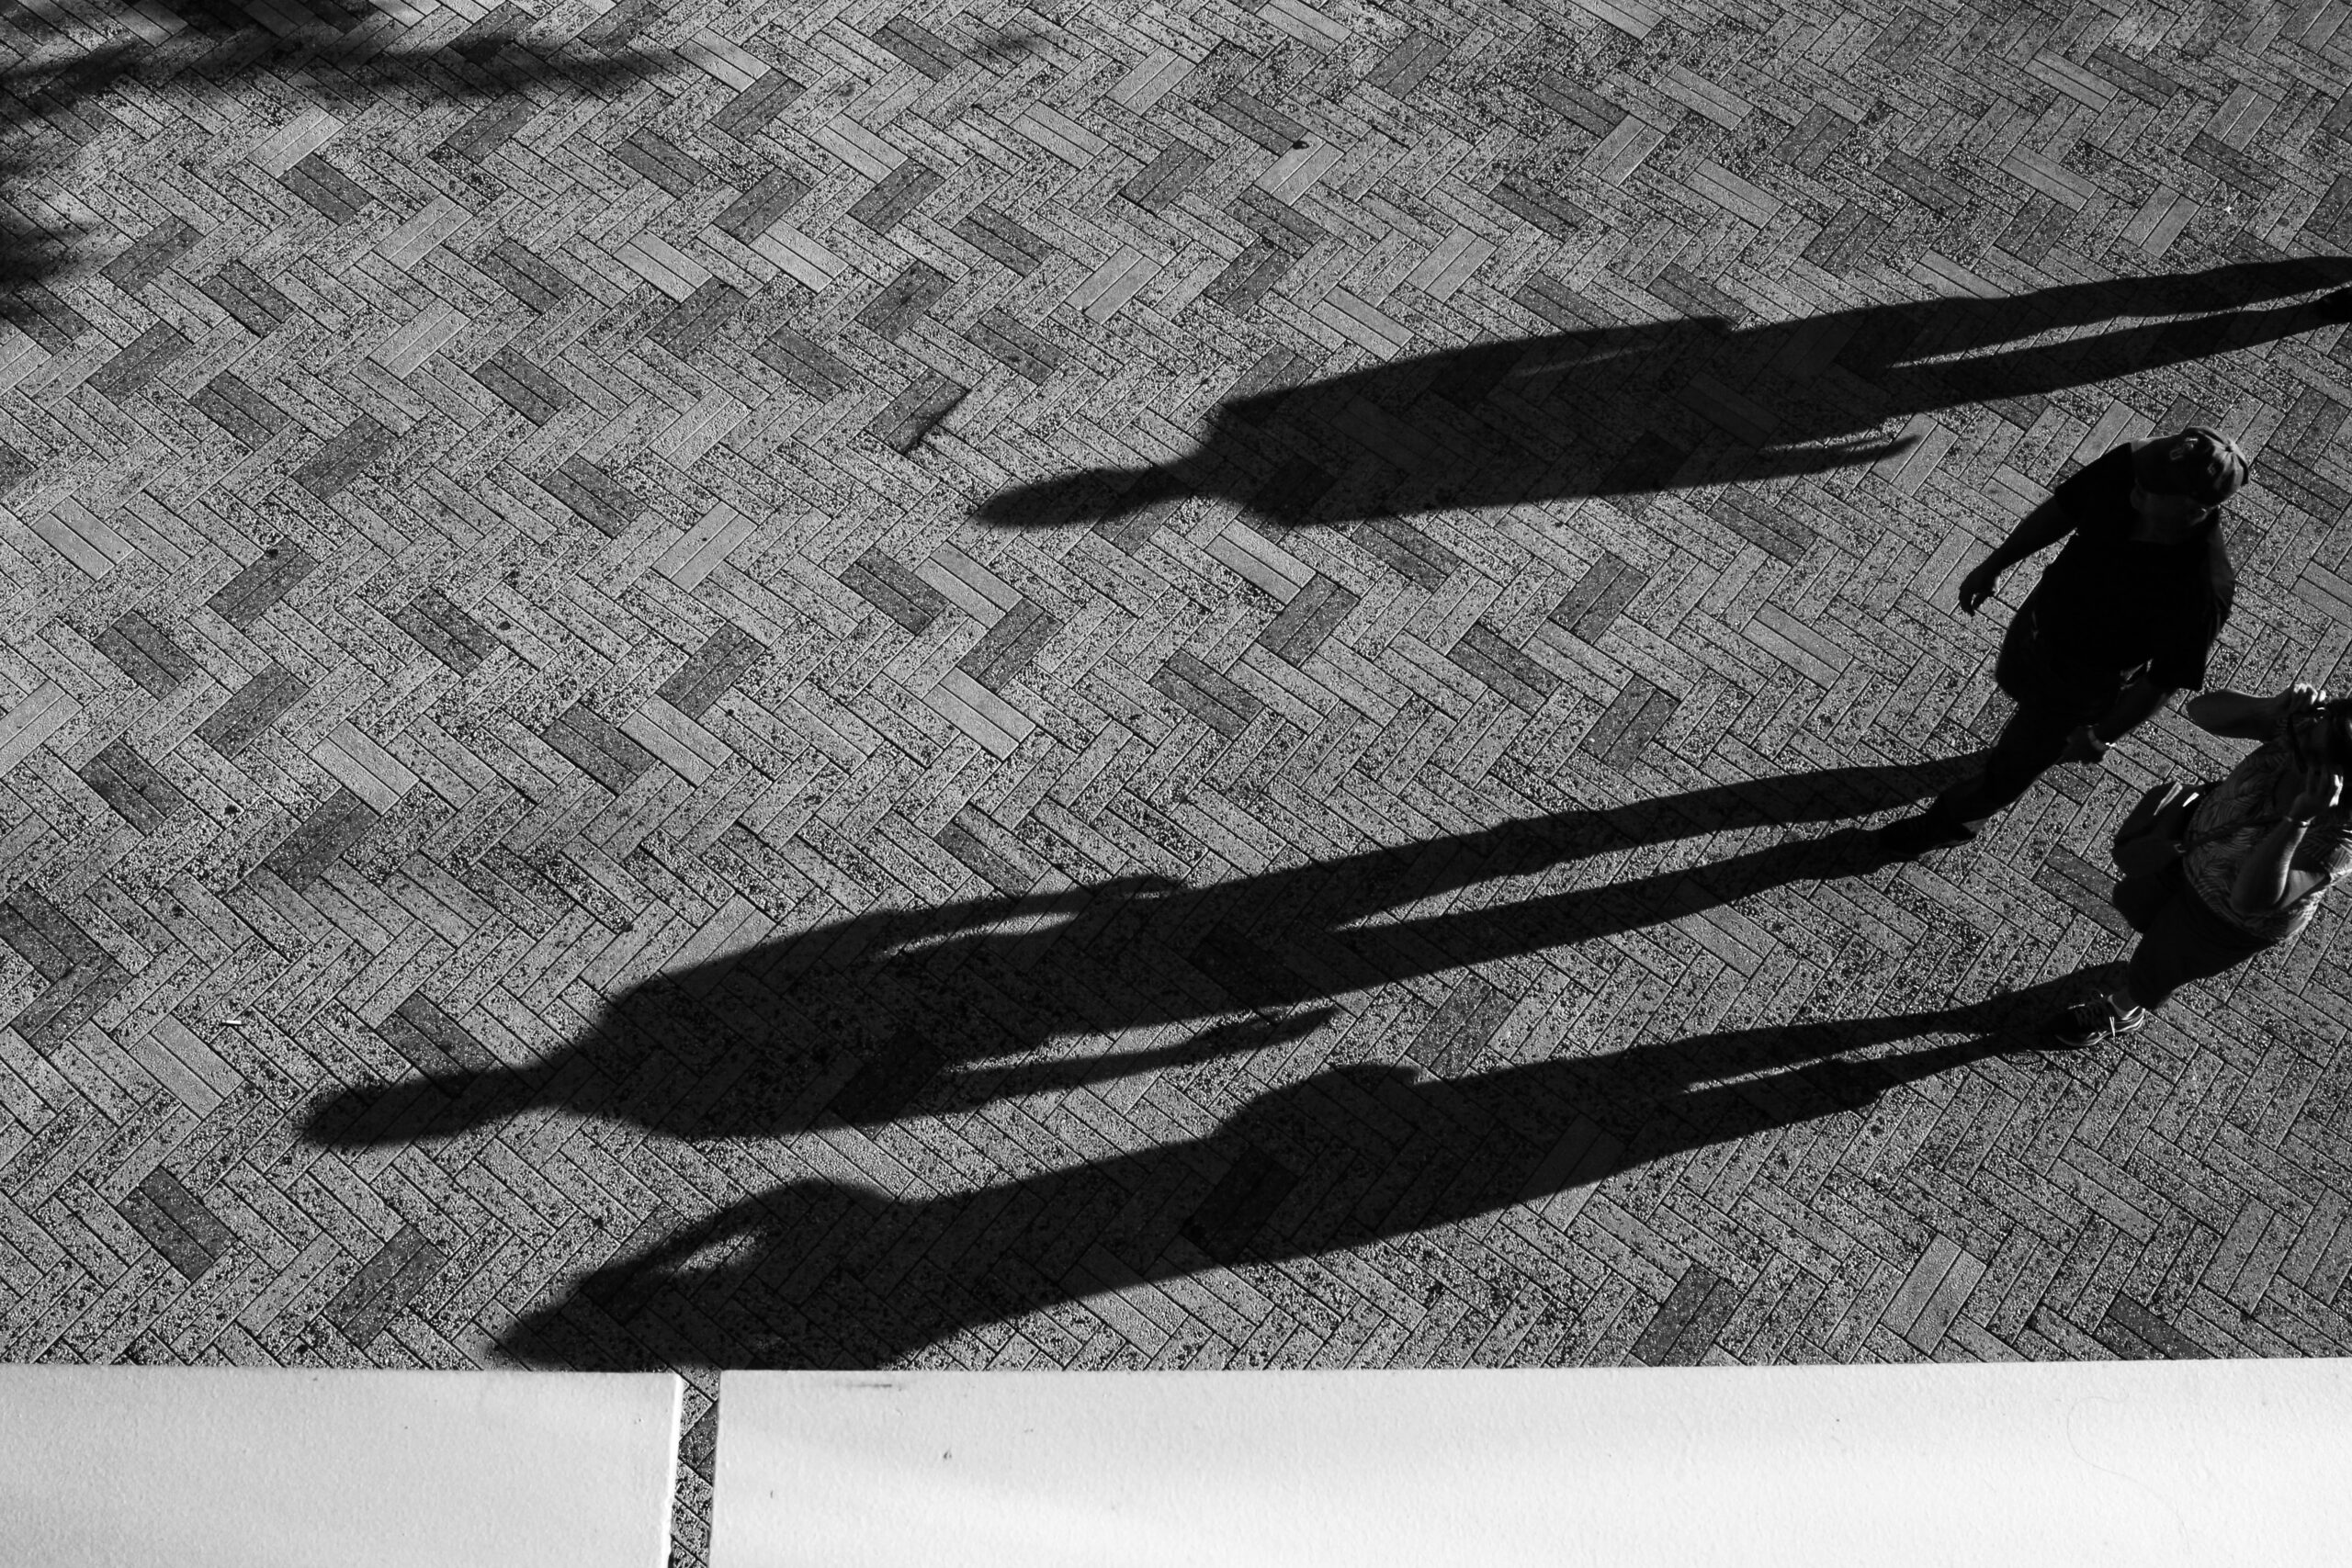 strengths and shadows